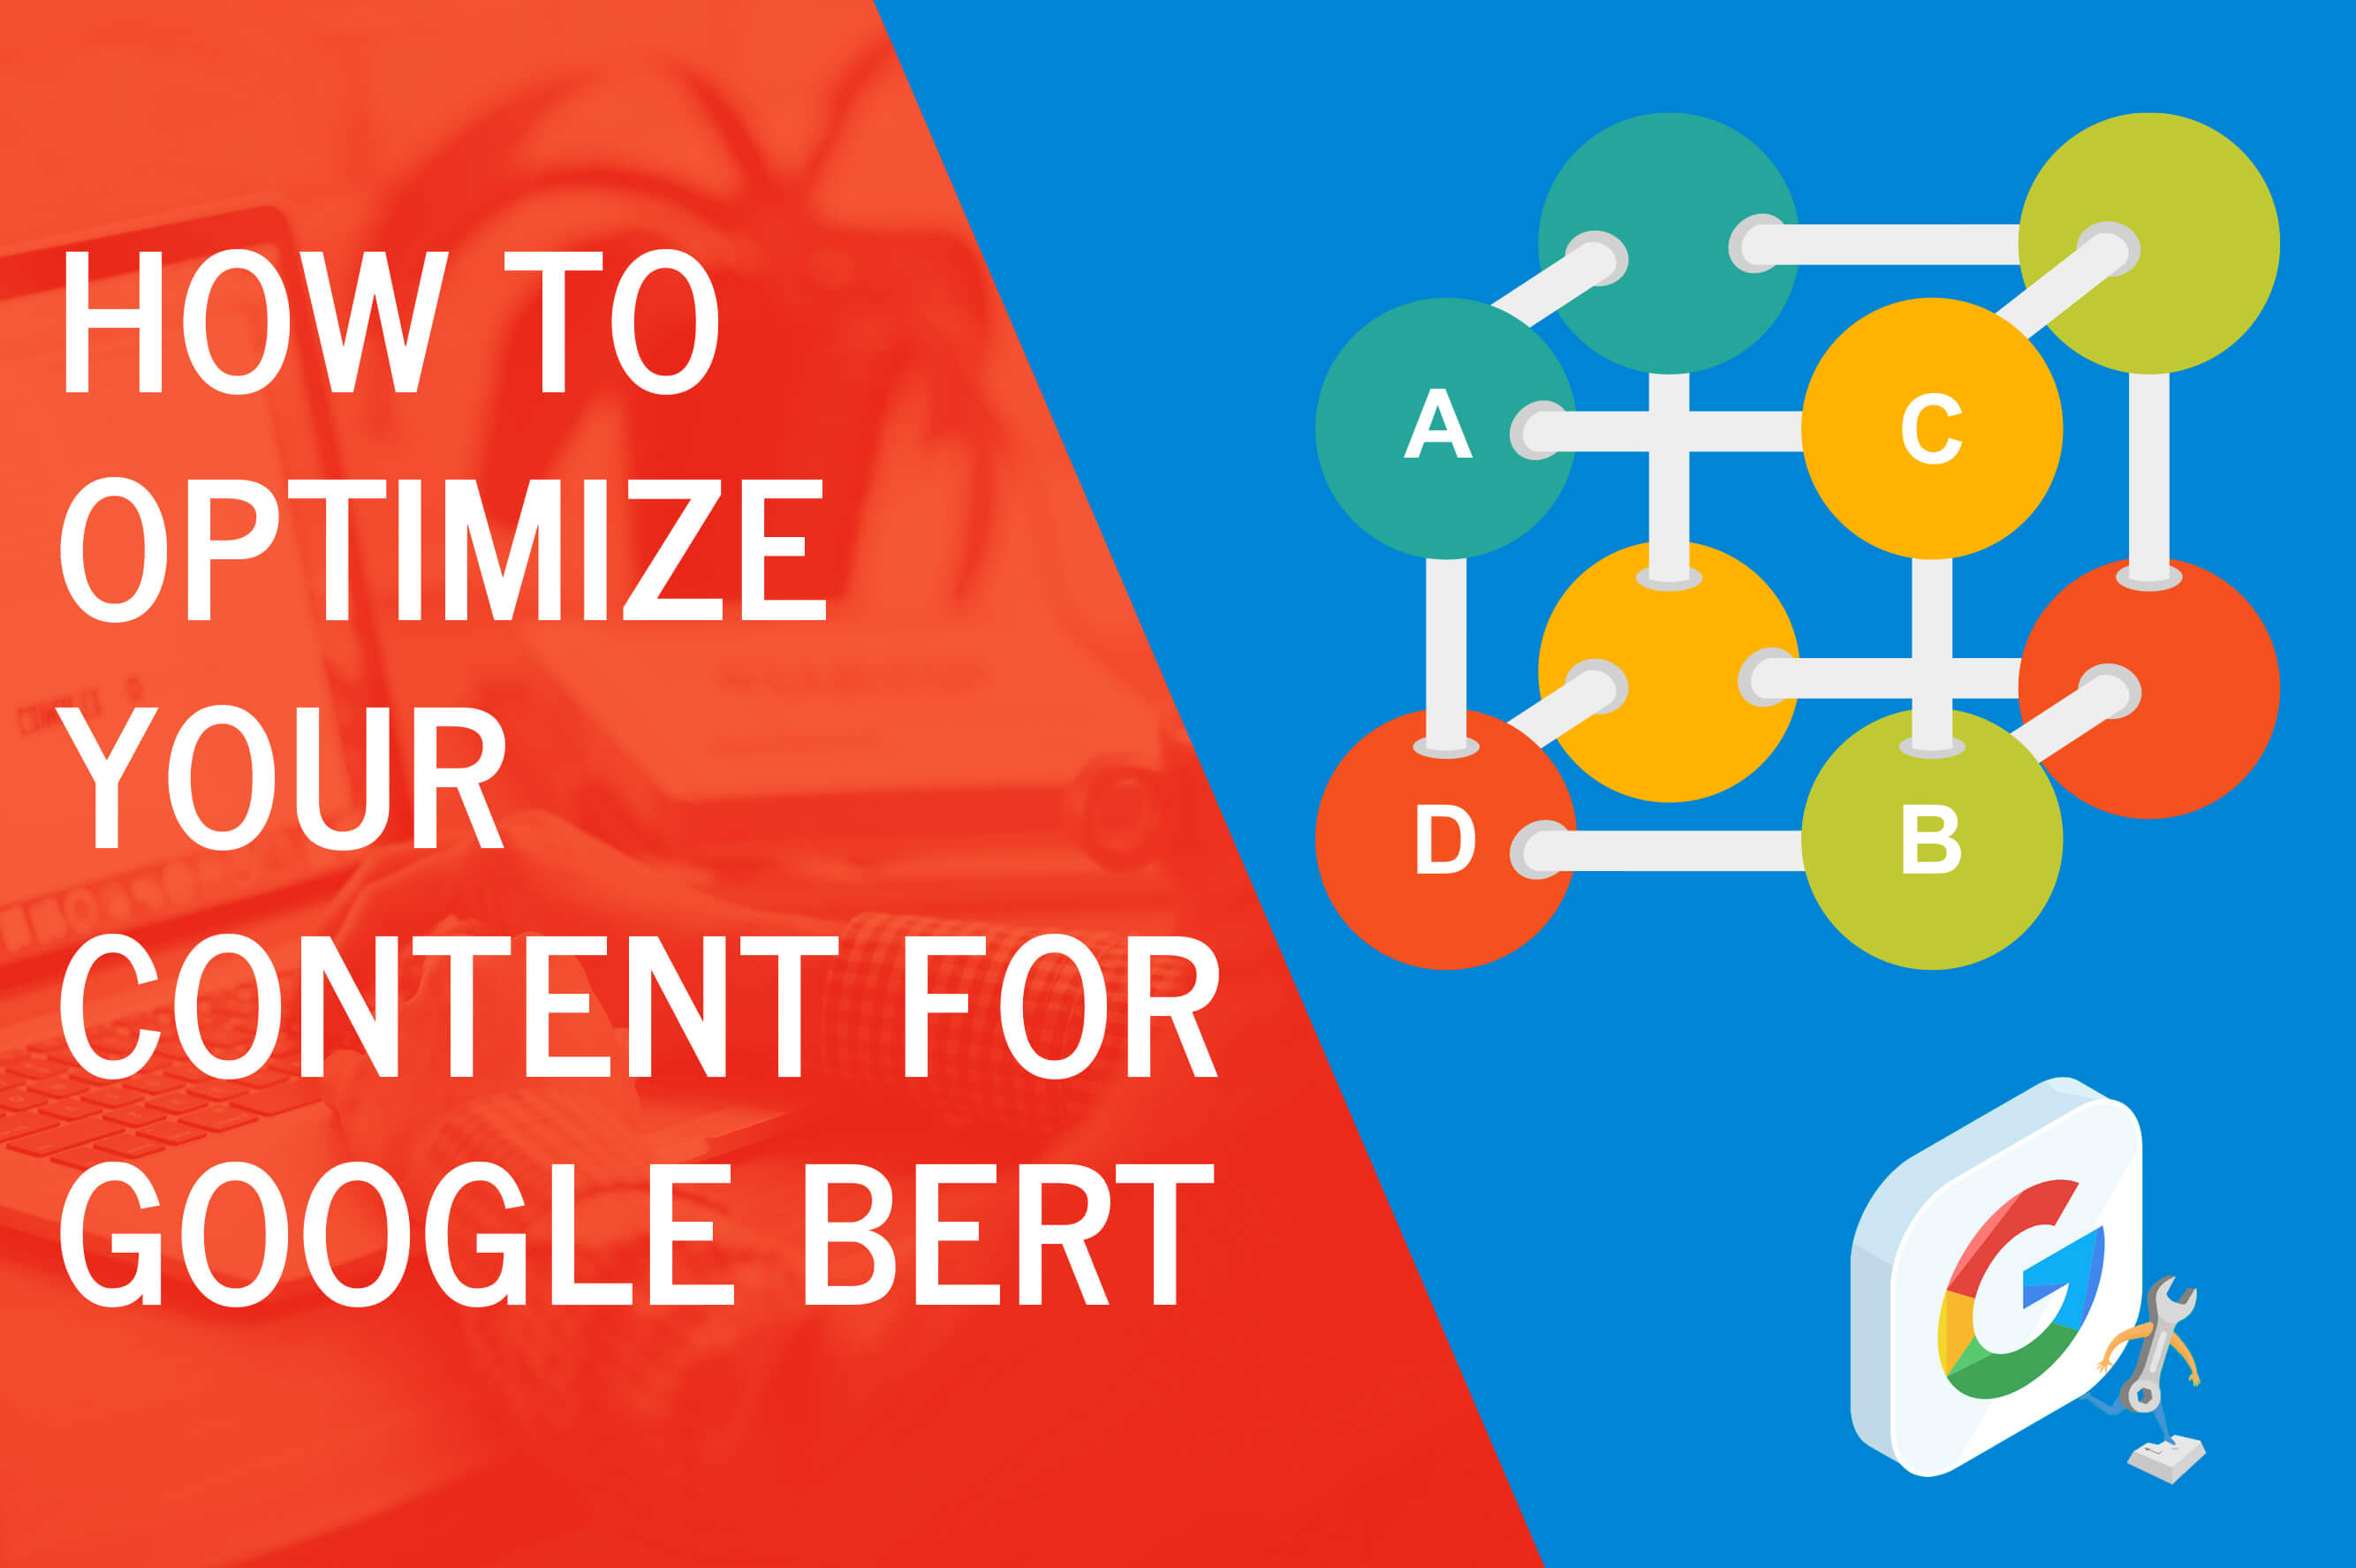 How to Optimize Your Content for Google BERT